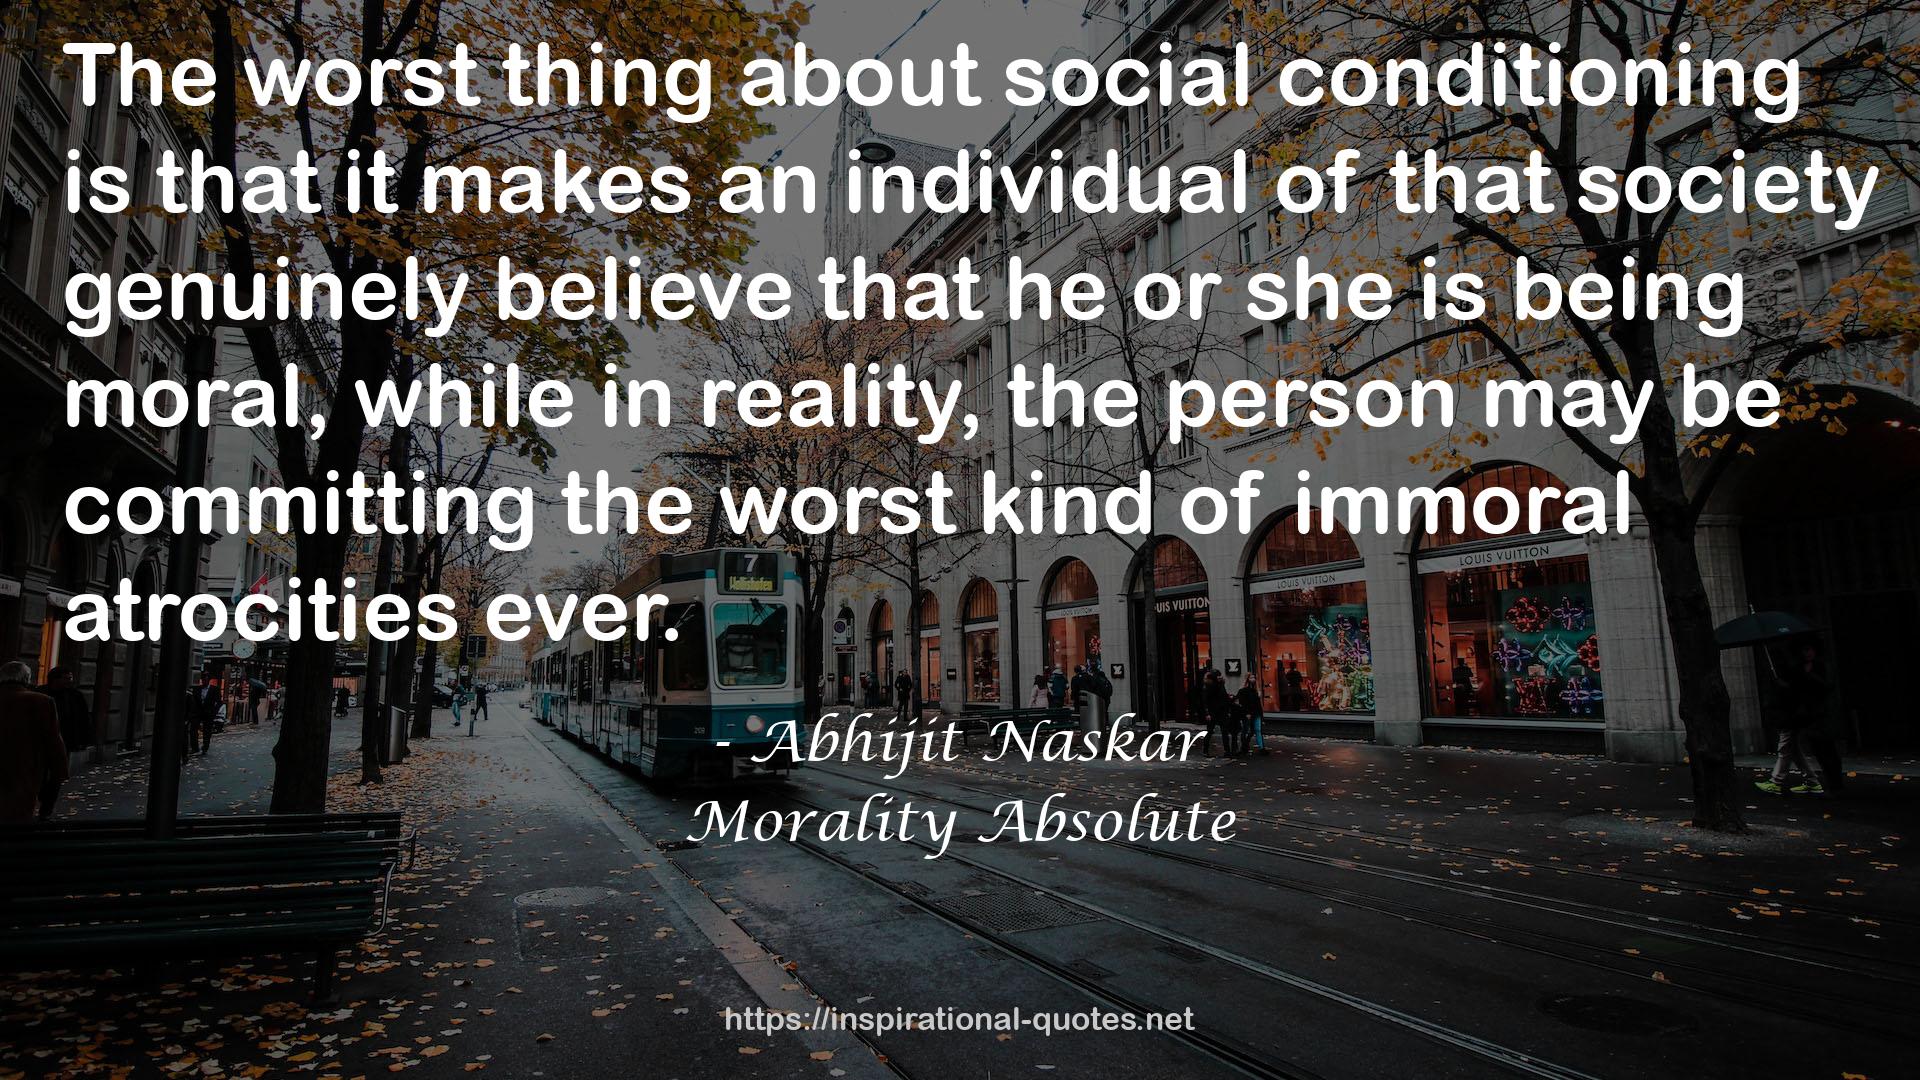 Morality Absolute QUOTES